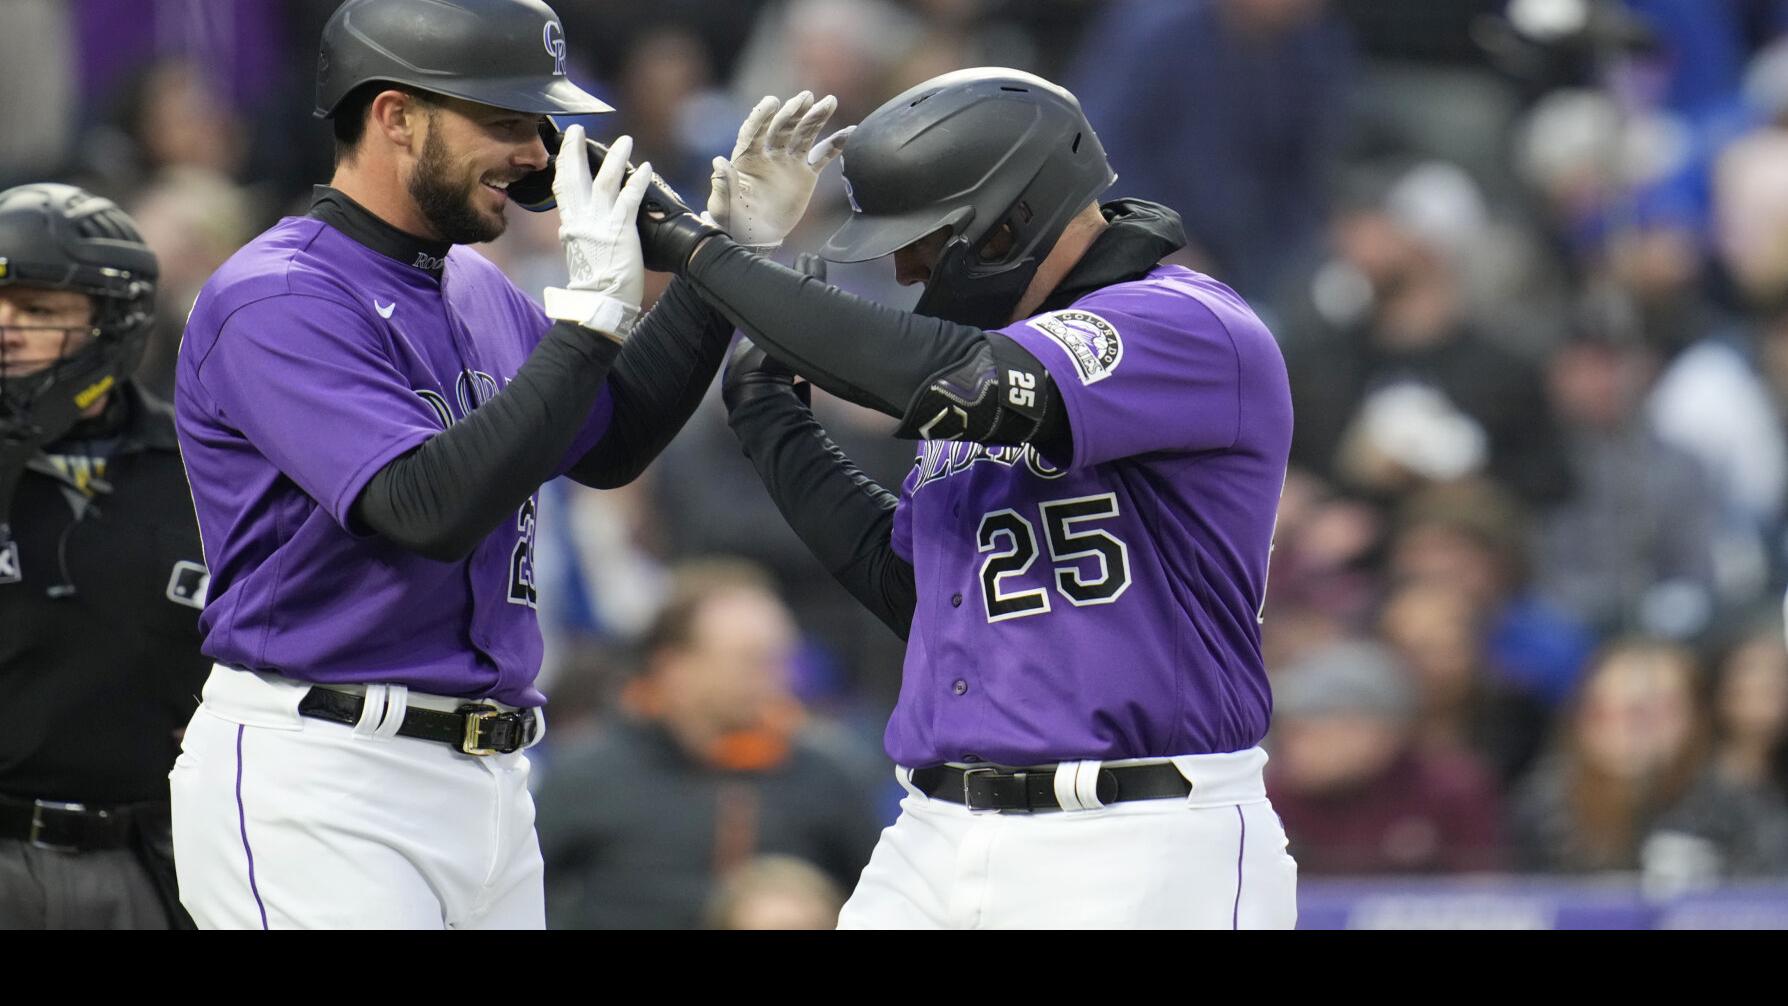 C.J. Cron launches two home runs as the Rockies' beat the Cubs 9-6, Rockies